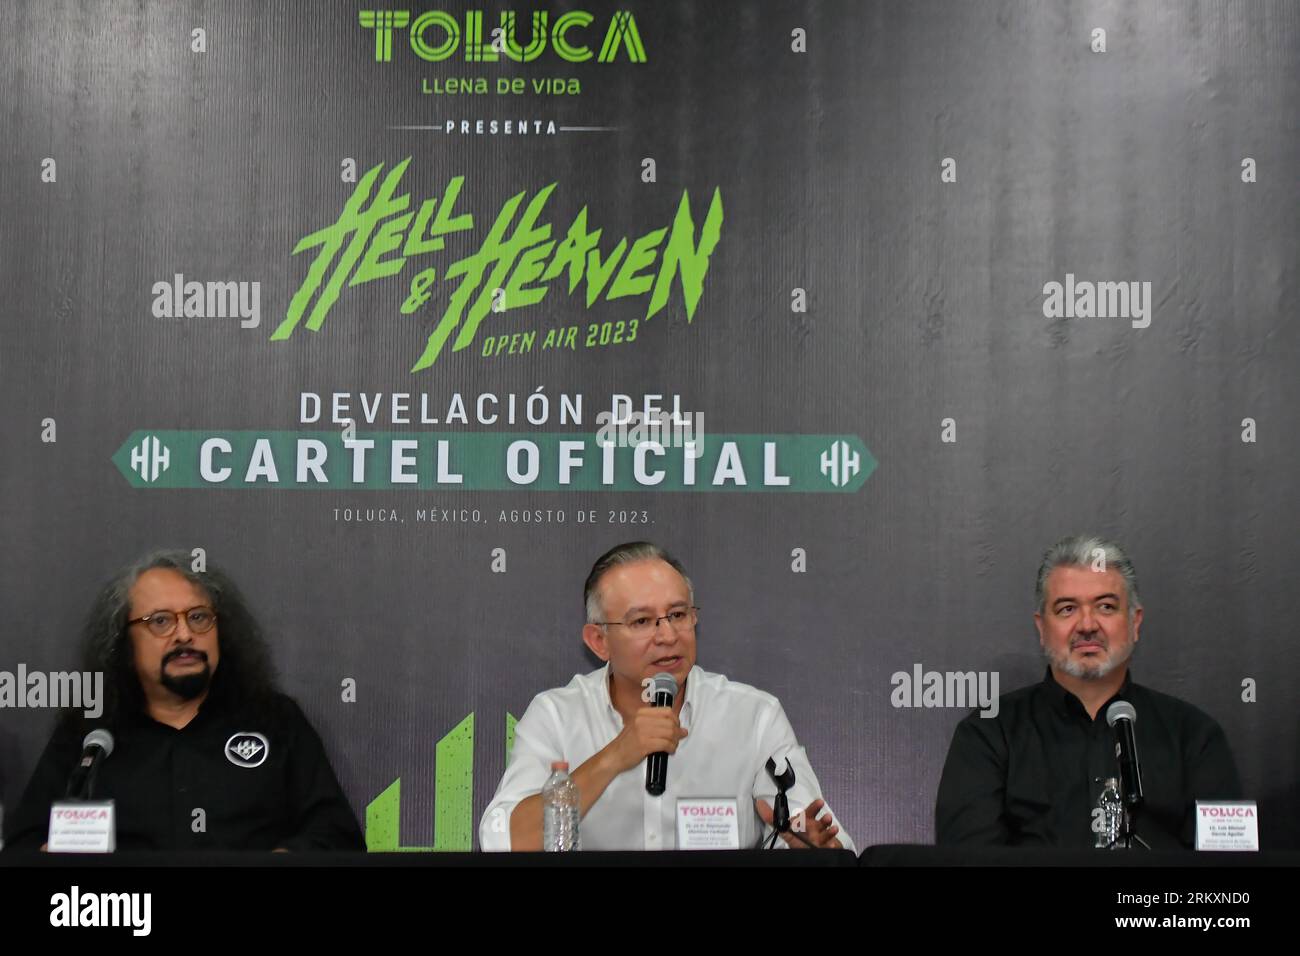 August 24, 2023 Toluca , Mexico : Juan Carlos Guerrero, Official Spokesperson for Hell and Heaven Festival, Raymundo Martinez Carbajal, Mayor of Toluca, Luis Manuel García Aguilar, General Director of Centro Dinámico Pegaso, during a press conference where they officially presented the poster for the Hell and Heaven Open Air 2023 music festival, which will take place at the Pegaso Dynamic Center in the city of Toluca from November 3 to 5, 2023. on August 24, 2023 in Toluca, México. (Photo by Arturo Hernández / Eyepix Group/Sipa USA) Stock Photo